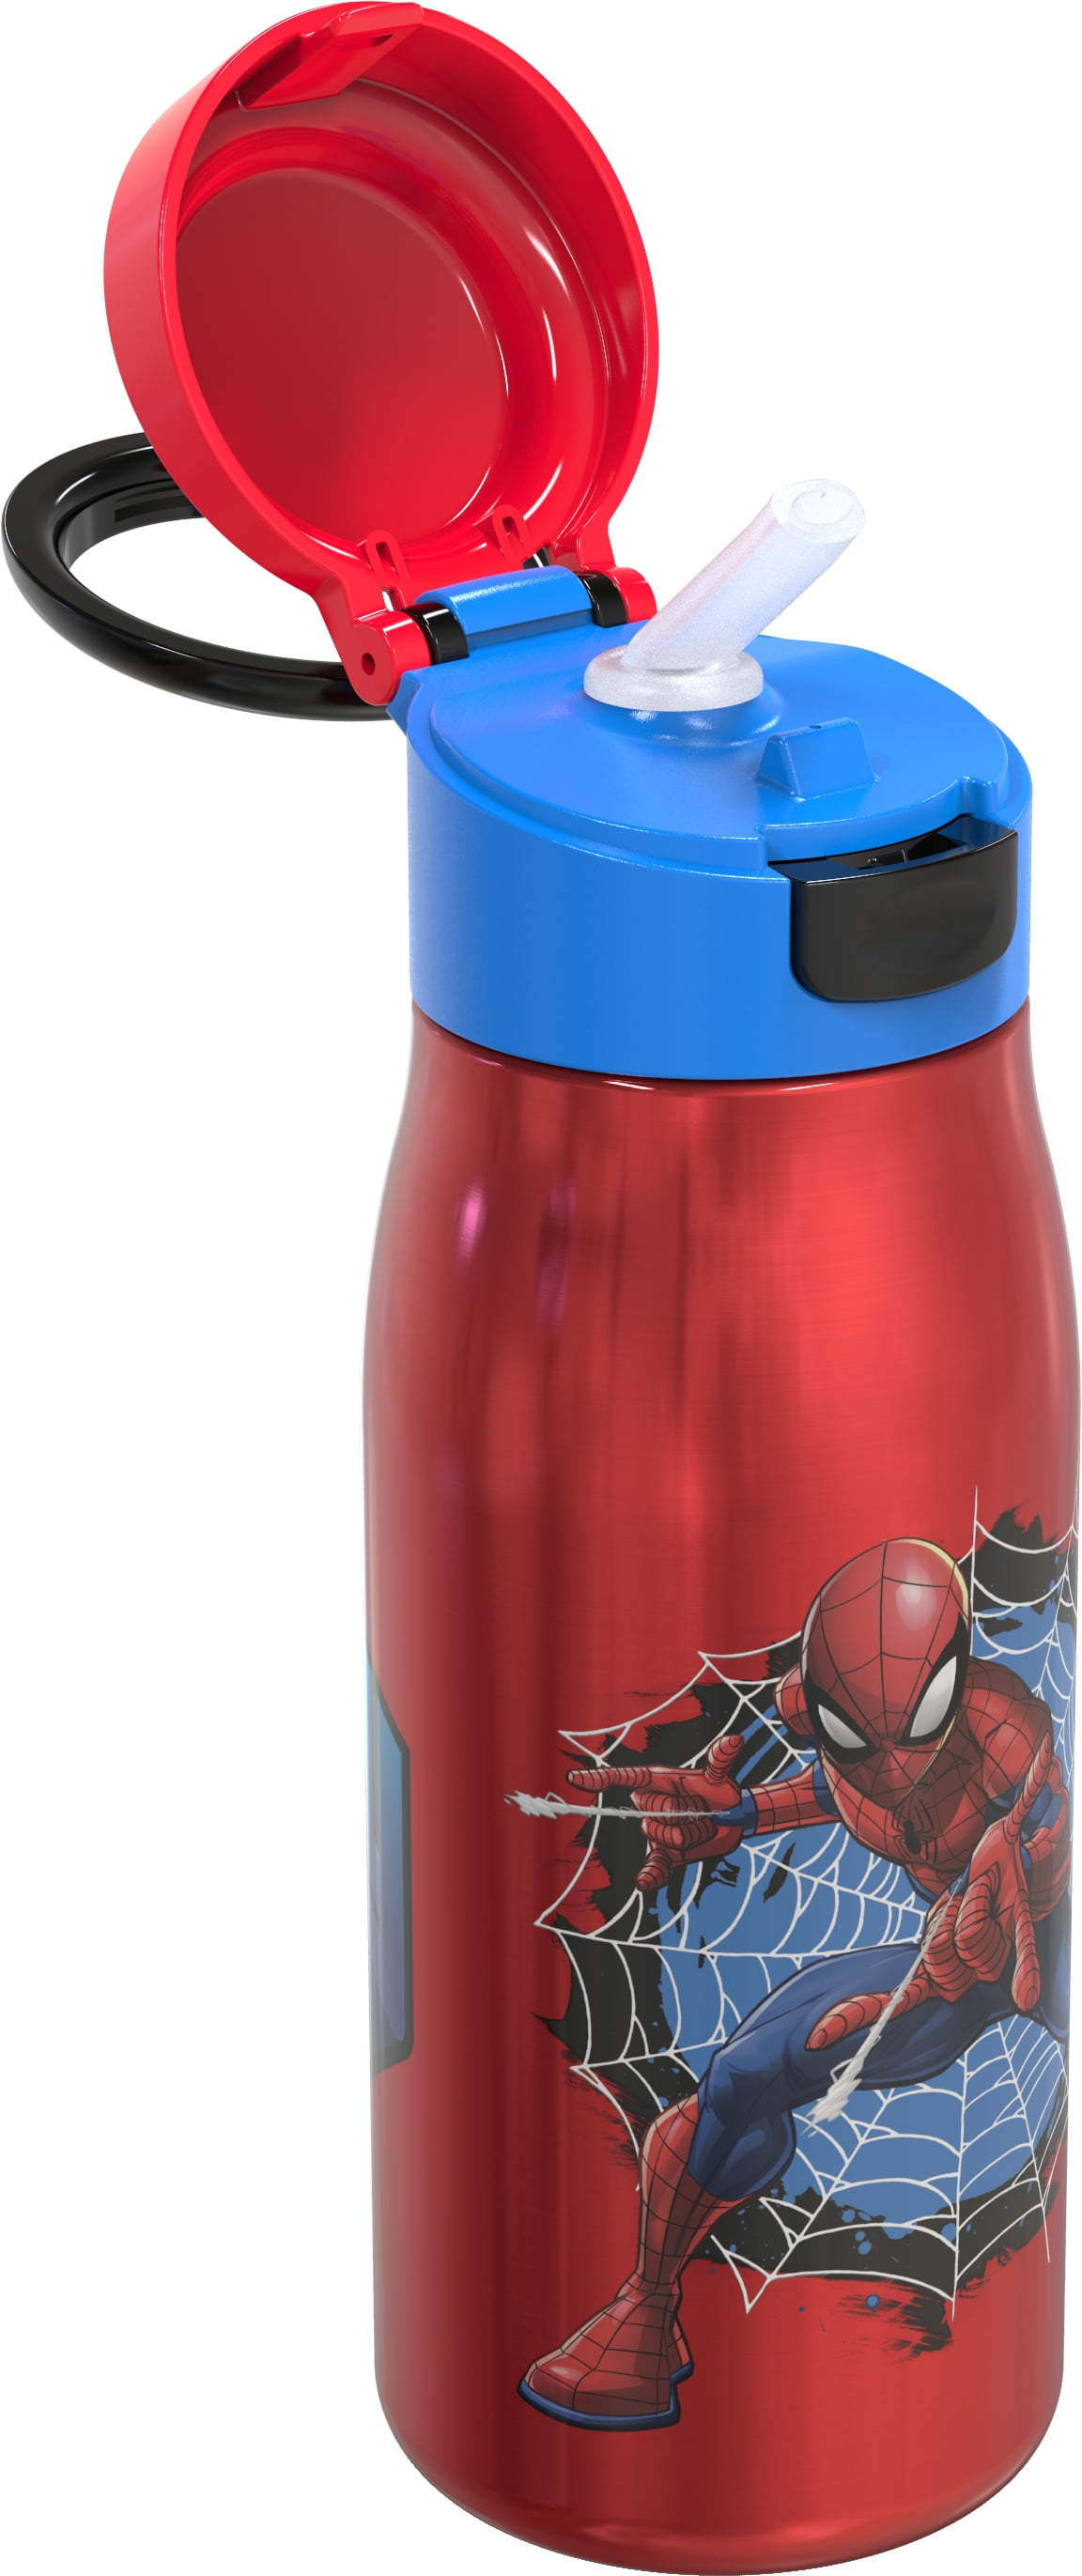 OFFICIAL MARVEL COMICS SPIDERMAN METAL DOUBLE WALLED WATER DRINKS BOTTLE FLASK 